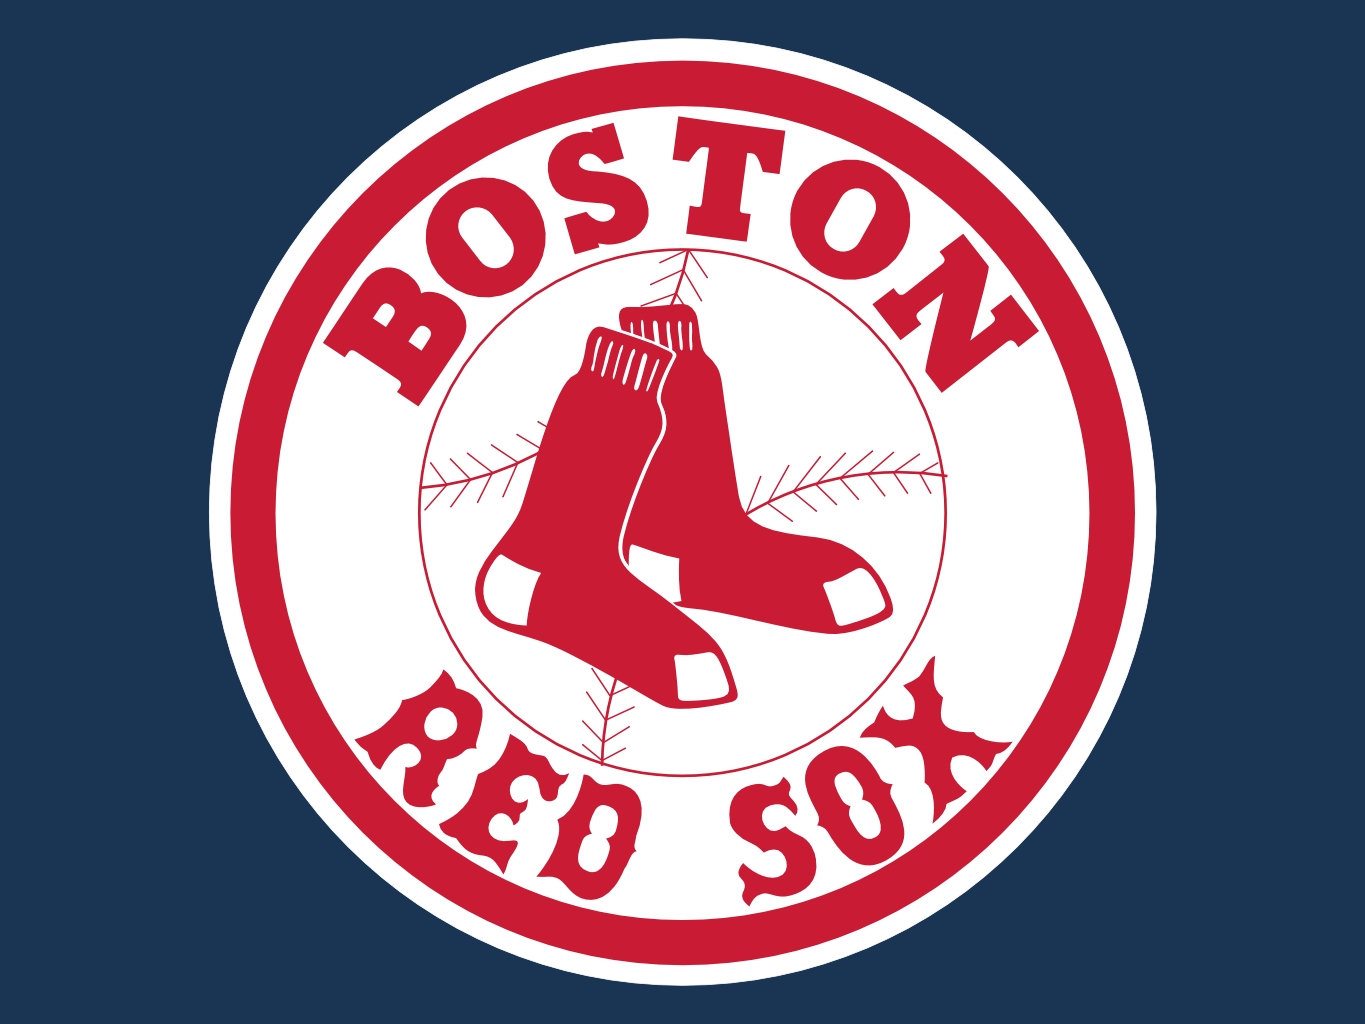 Boston Red Soxs player